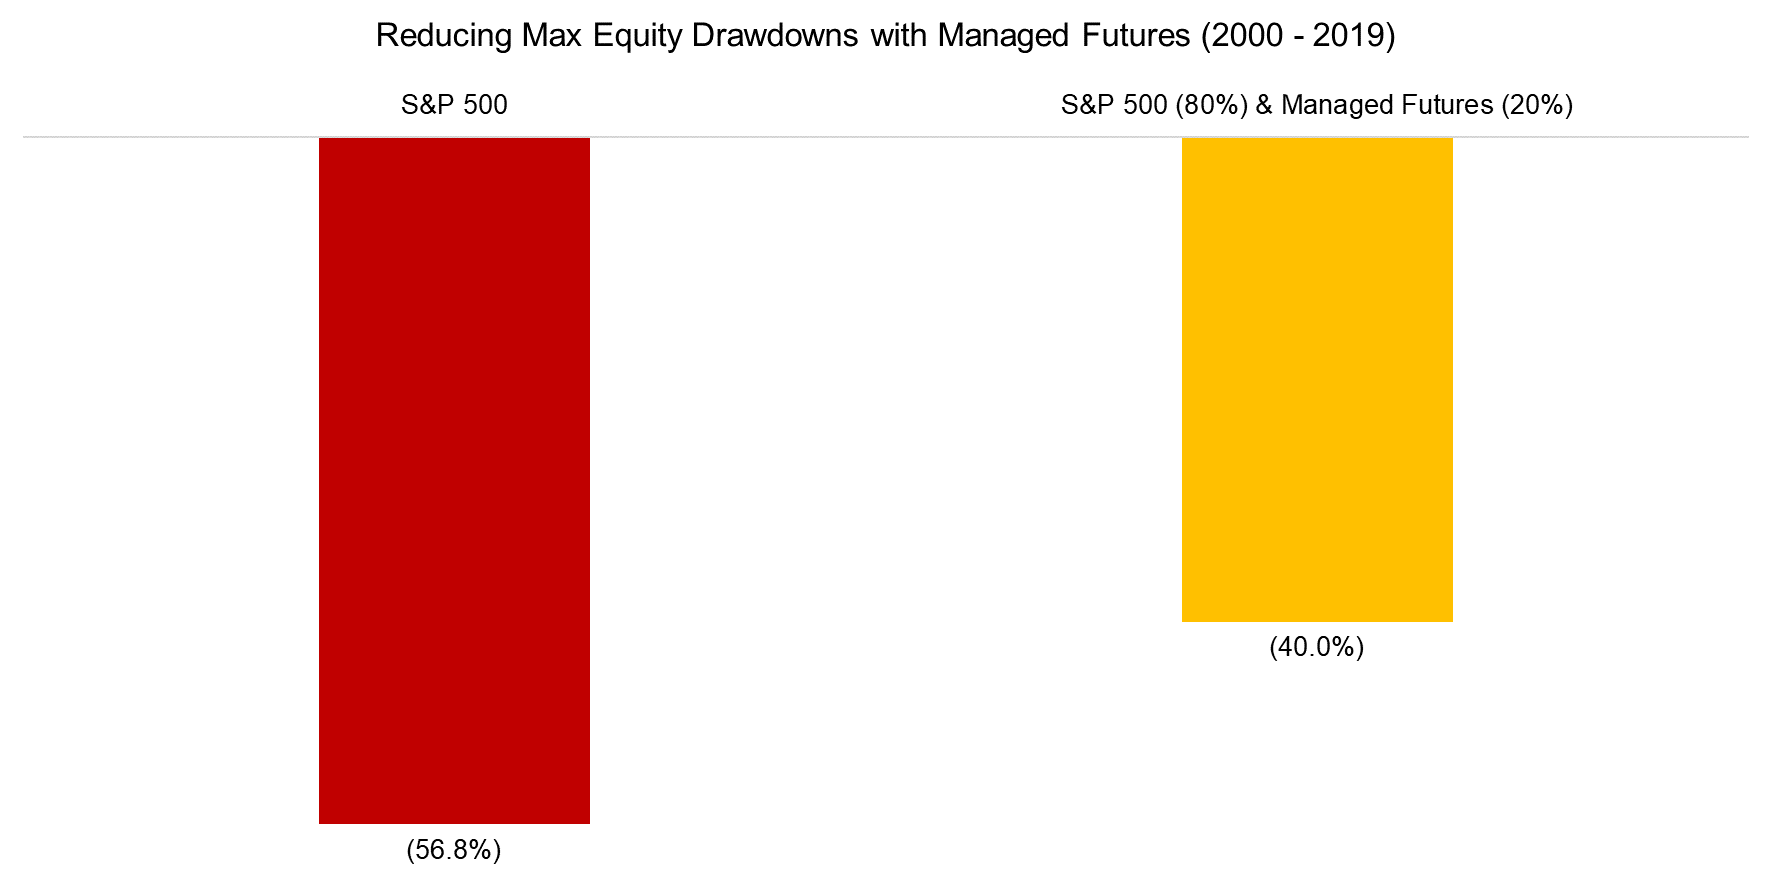 Reducing Max Equity Drawdowns with Managed Futures (2000 - 2019)